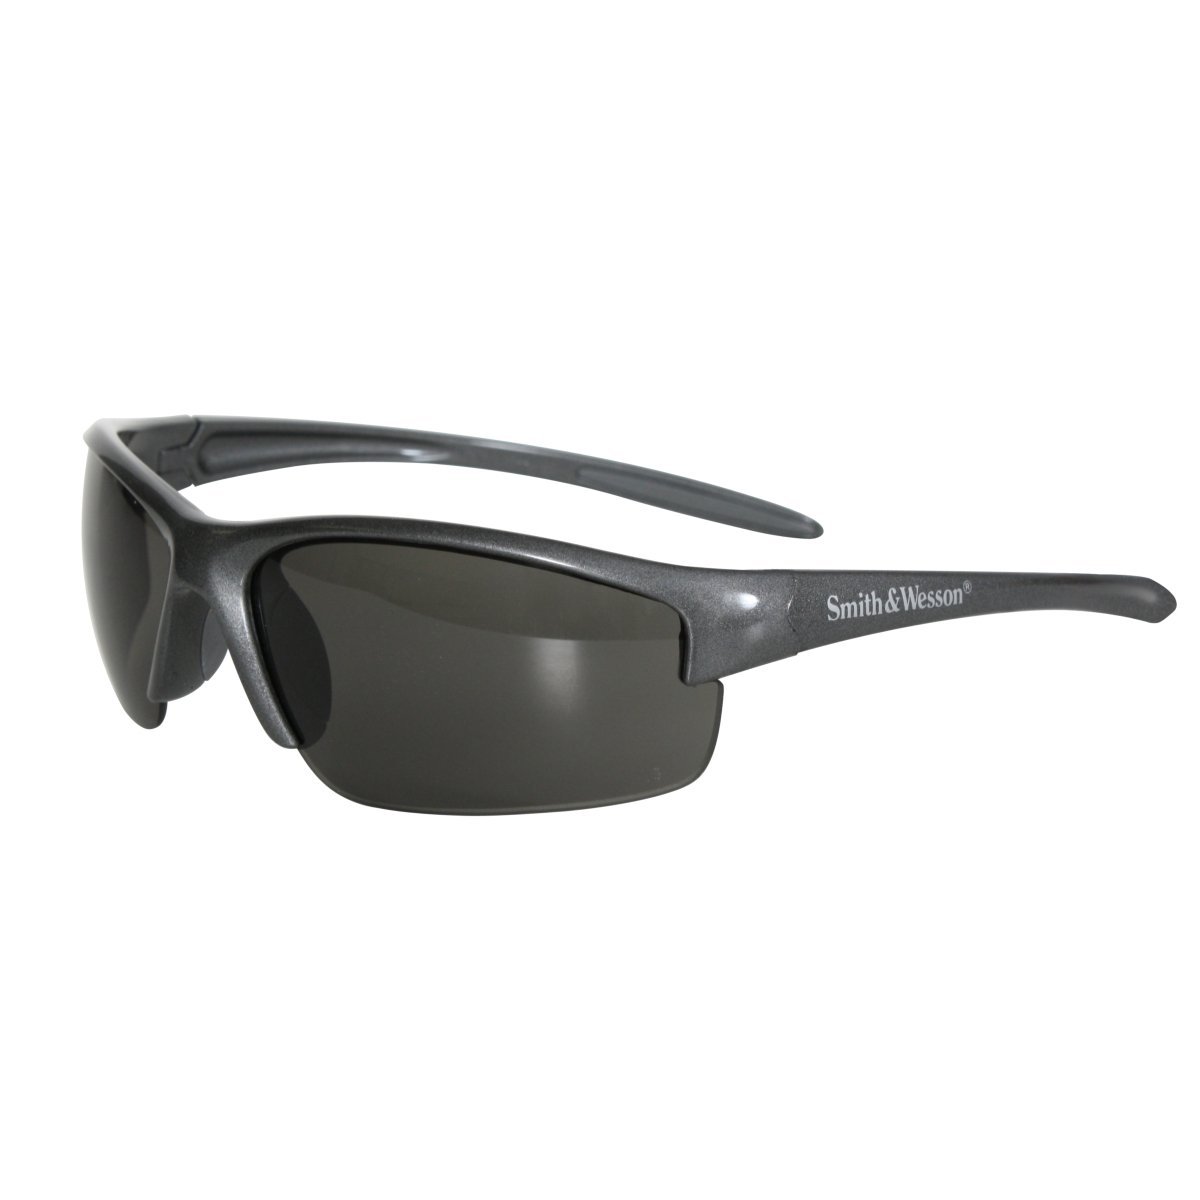 Smith & Wesson Equalizer Safety Glasses